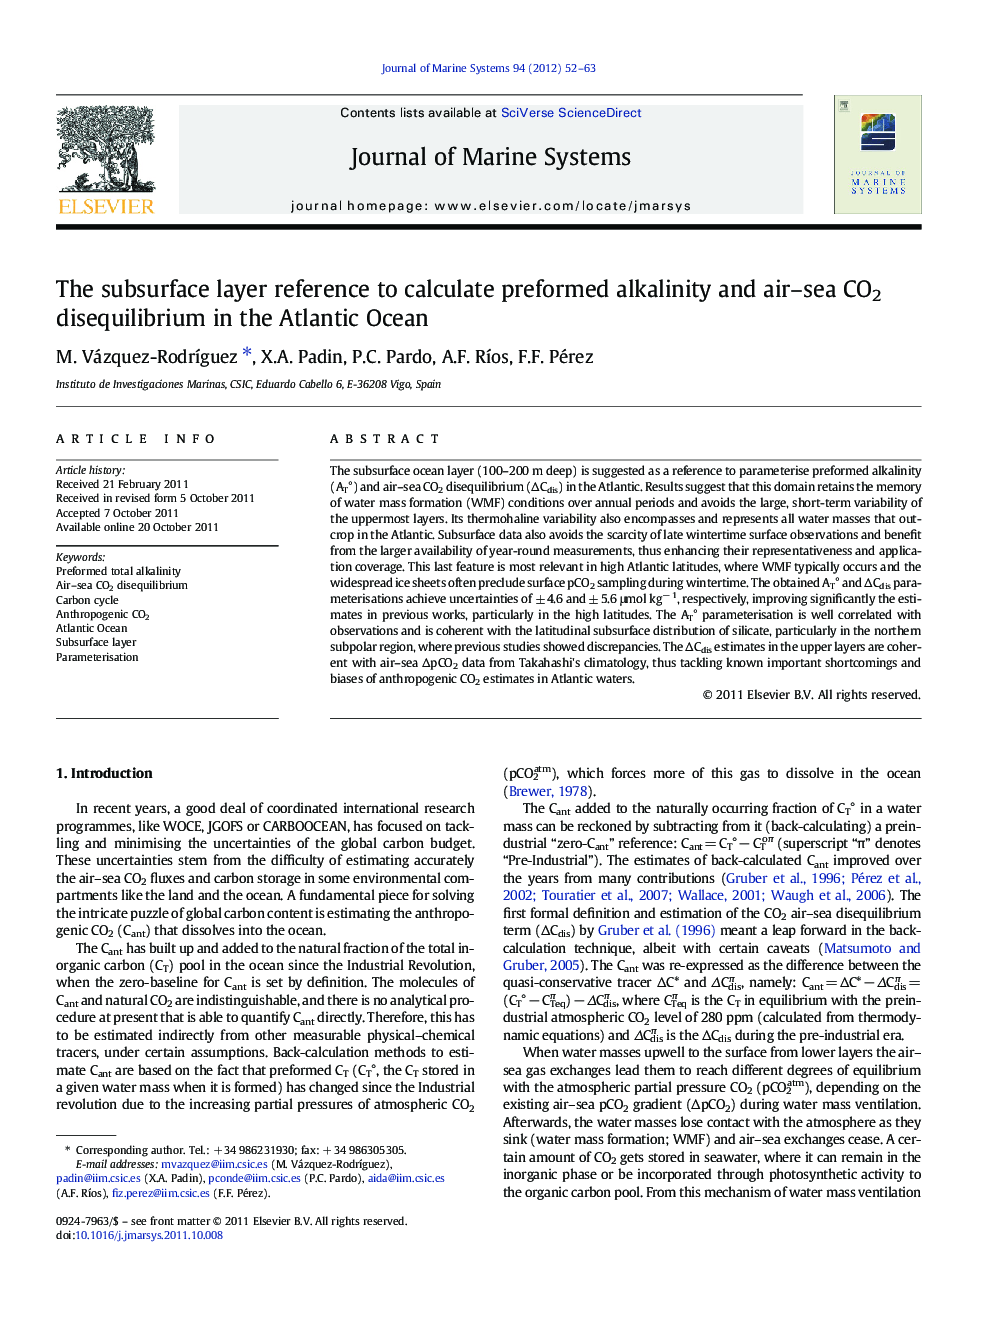 The subsurface layer reference to calculate preformed alkalinity and air–sea CO2 disequilibrium in the Atlantic Ocean